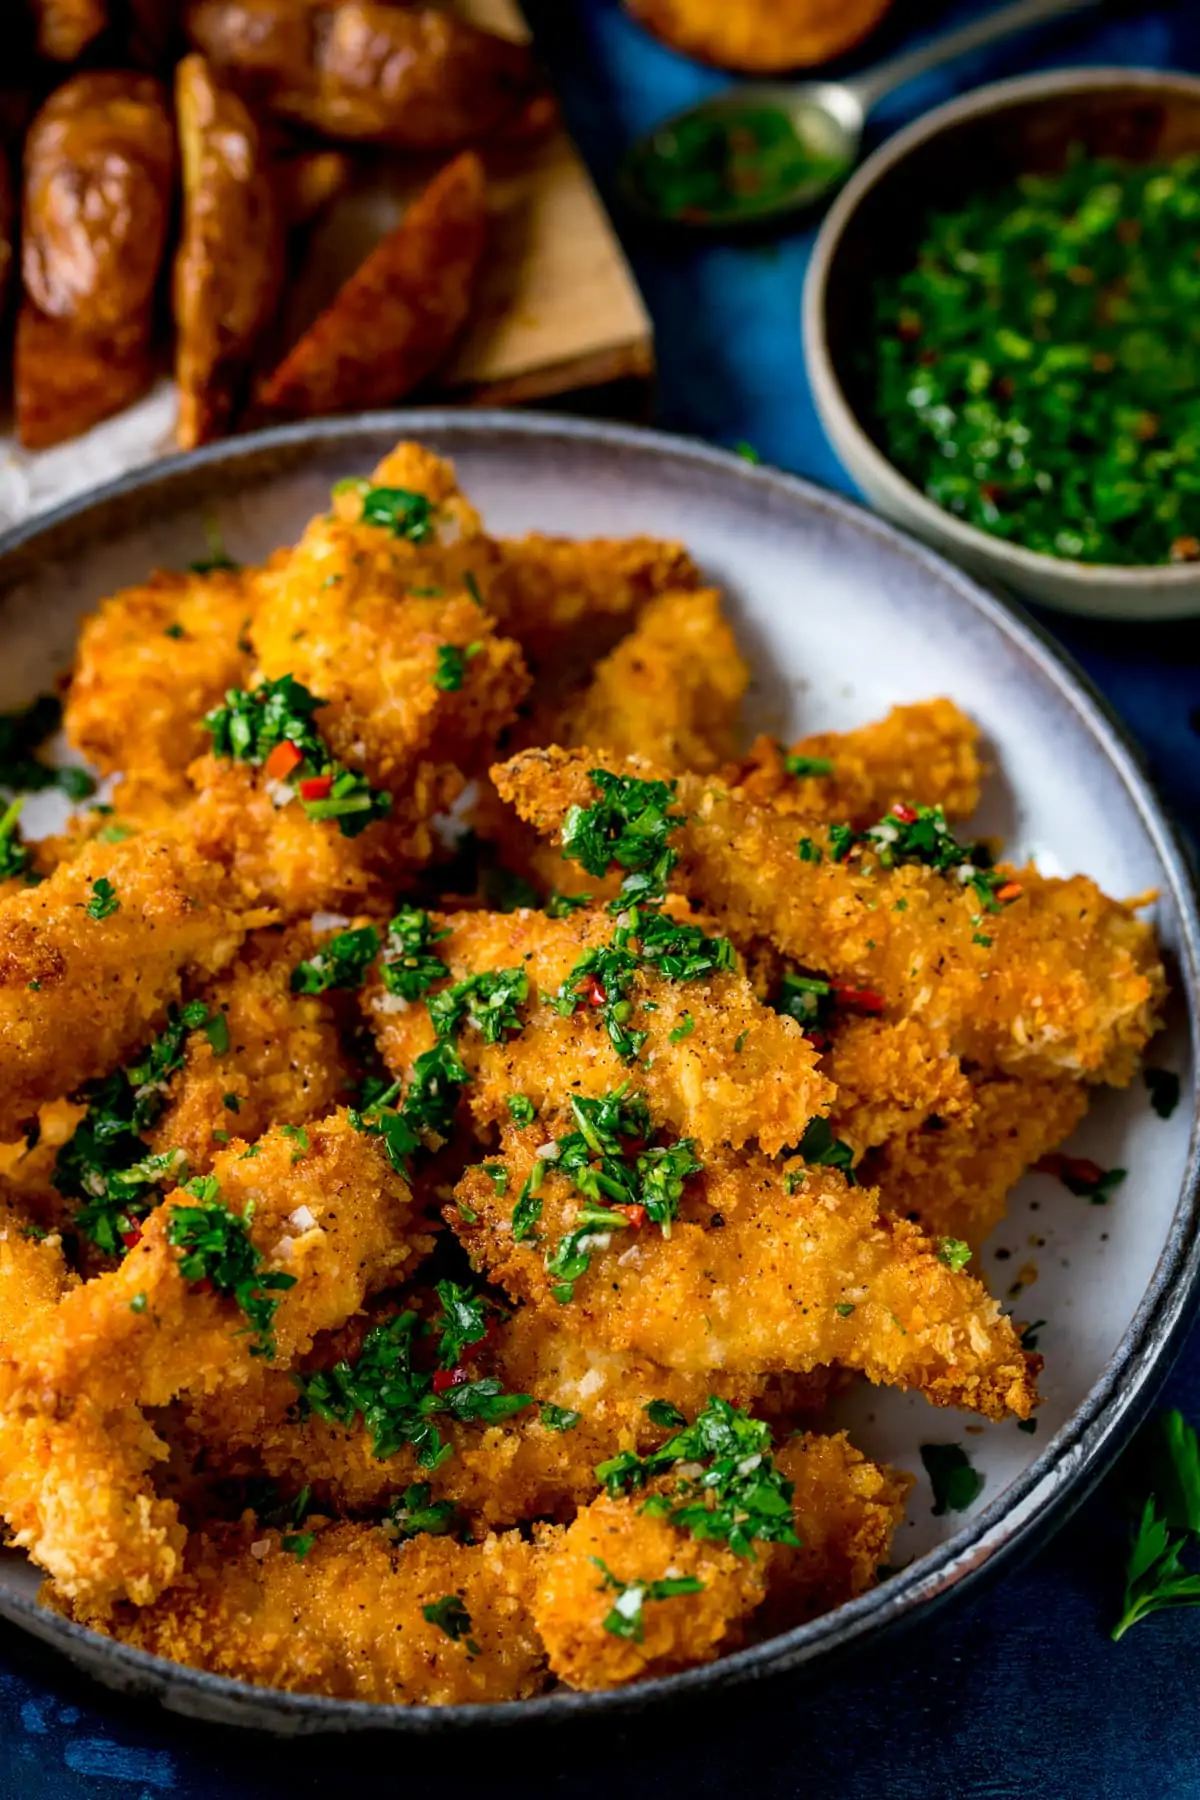 A bowl of golden baked chicken goujons with chimichurri sauce drizzled over.